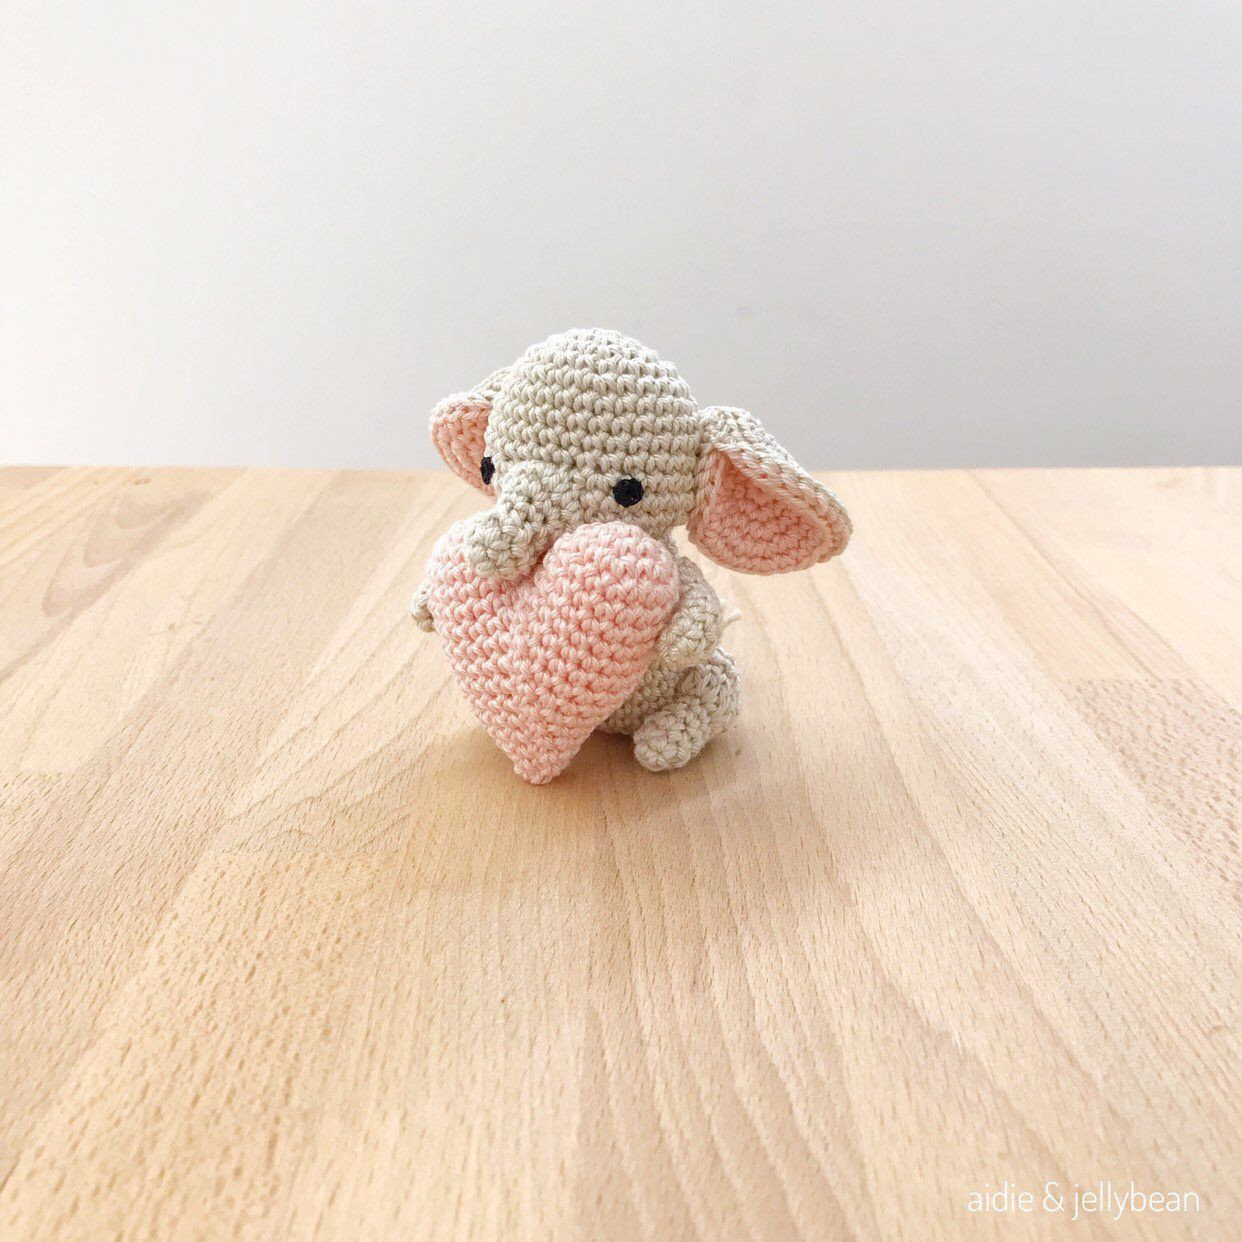 Outdoorsy Baby Gifts
 Ready to ship Limited edition SMALL ELEPHANT crochet